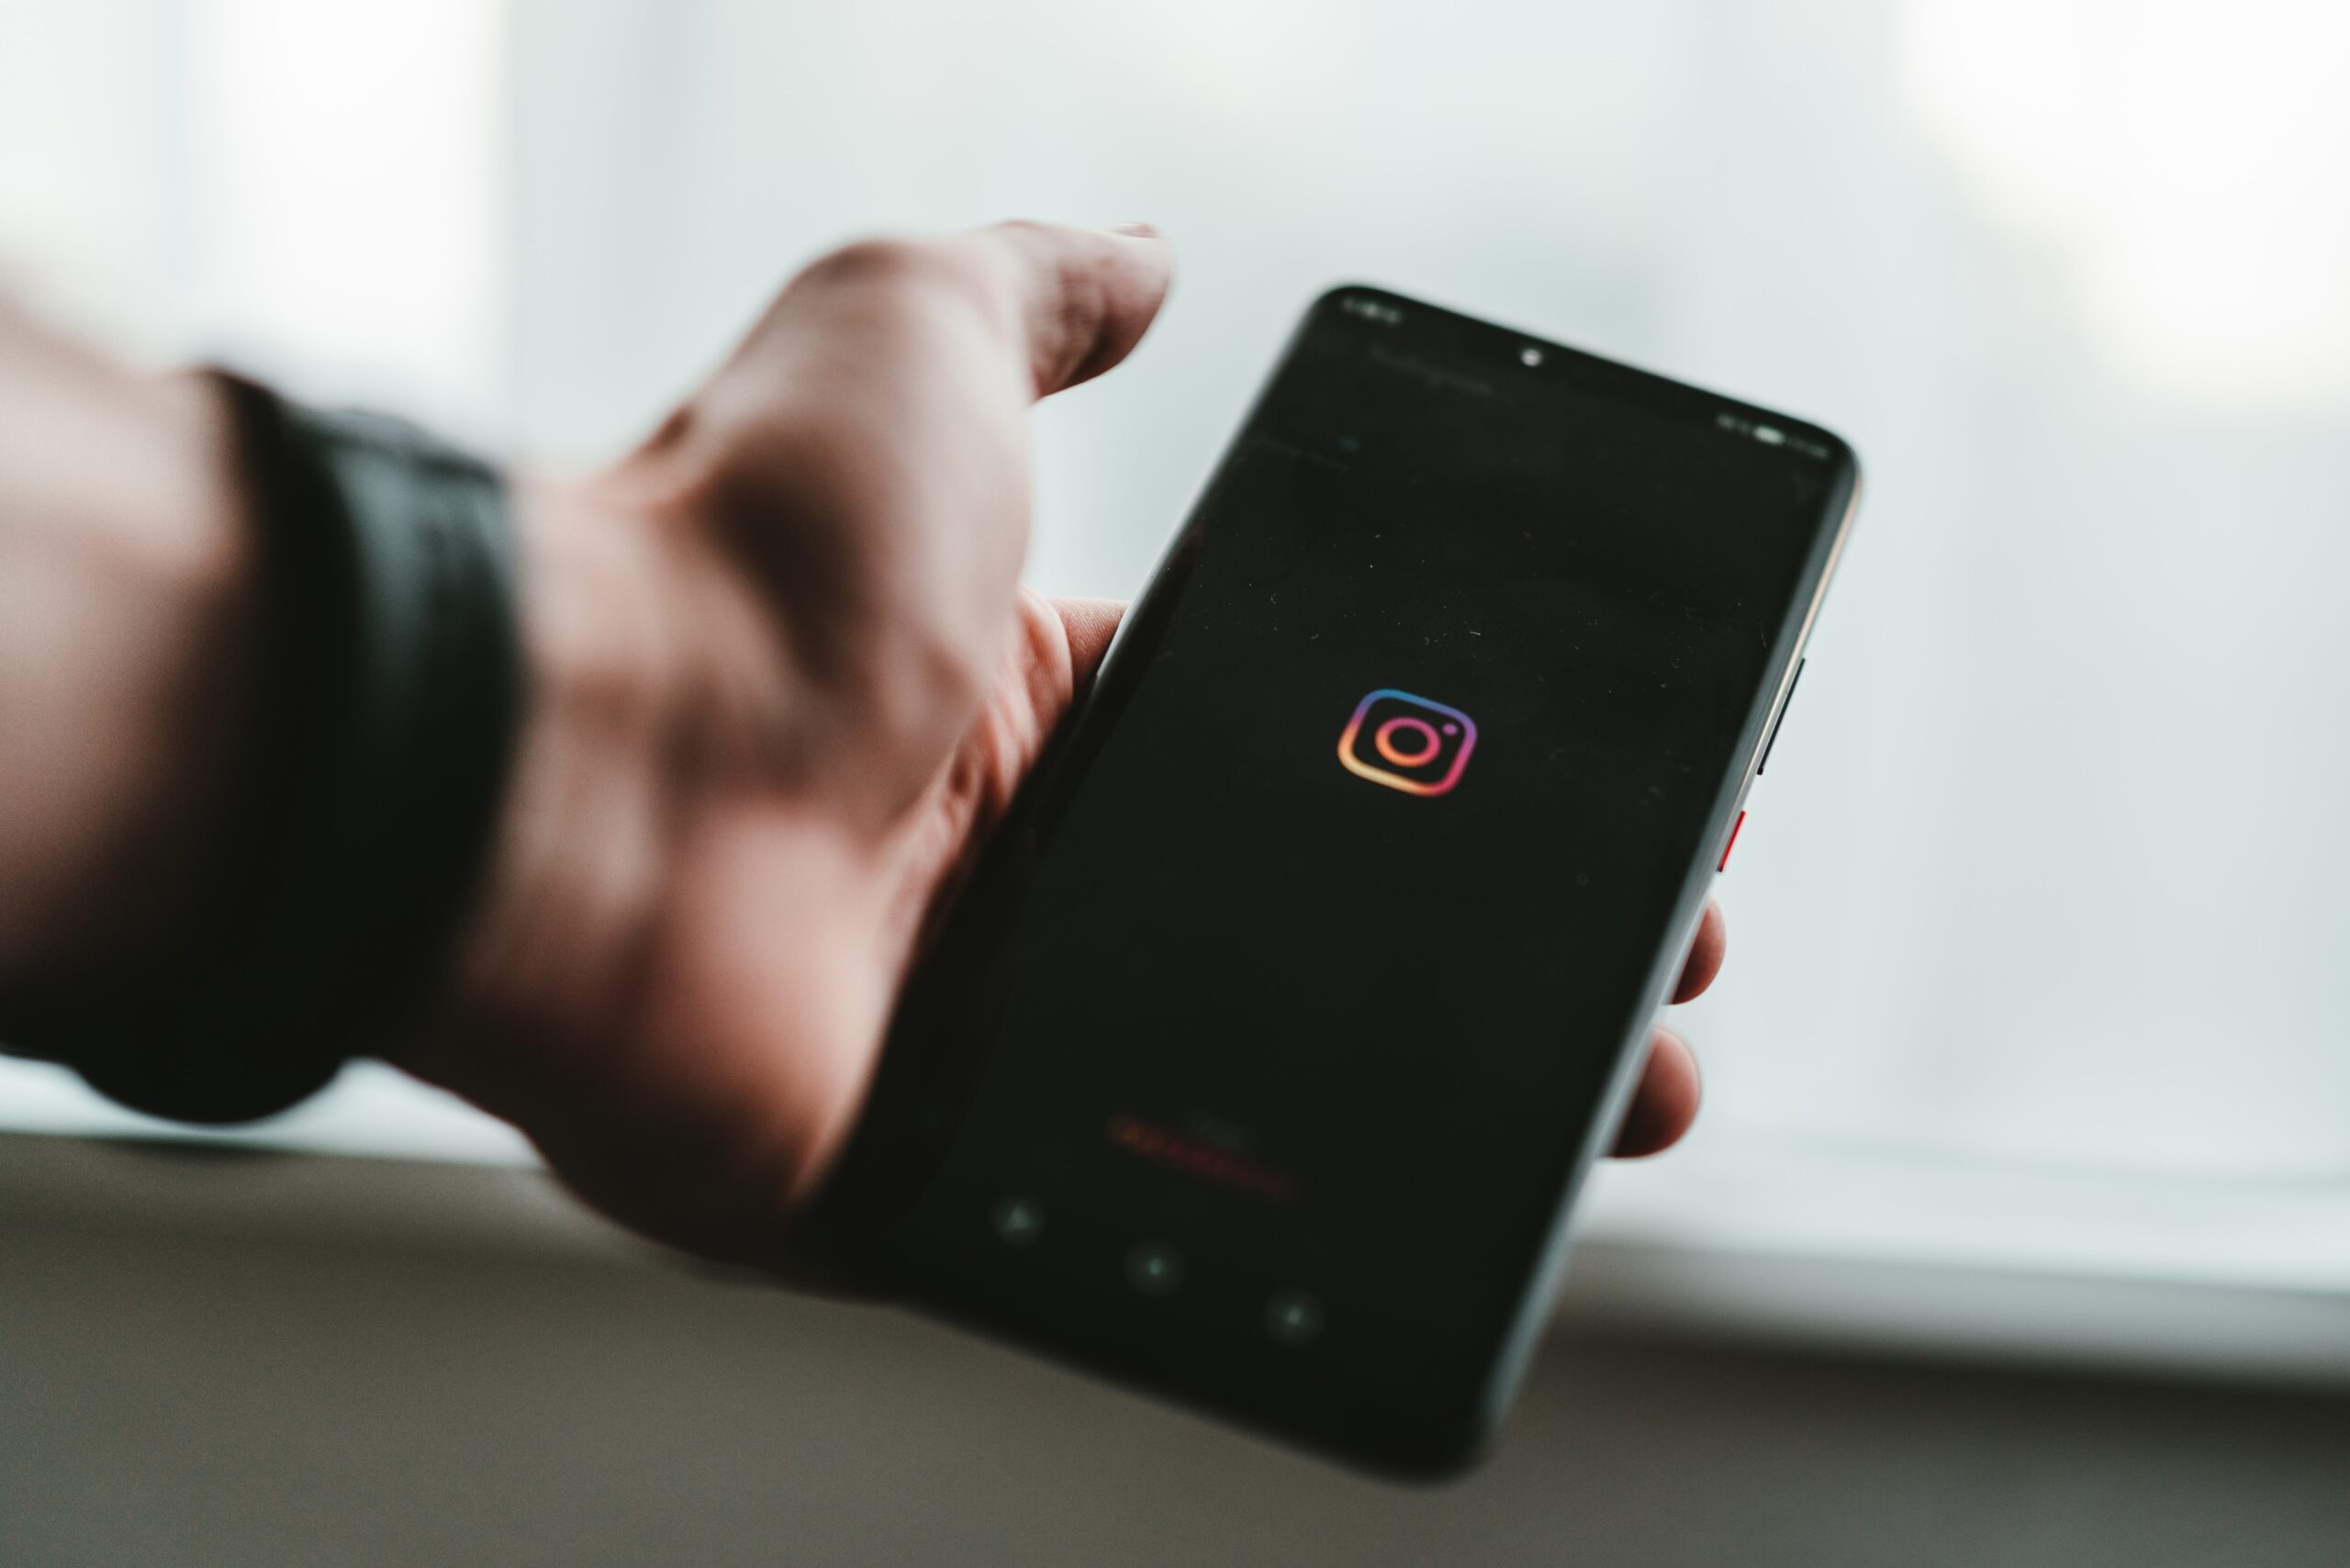 Instagram’s ‘Account Suspended’ outage resolved